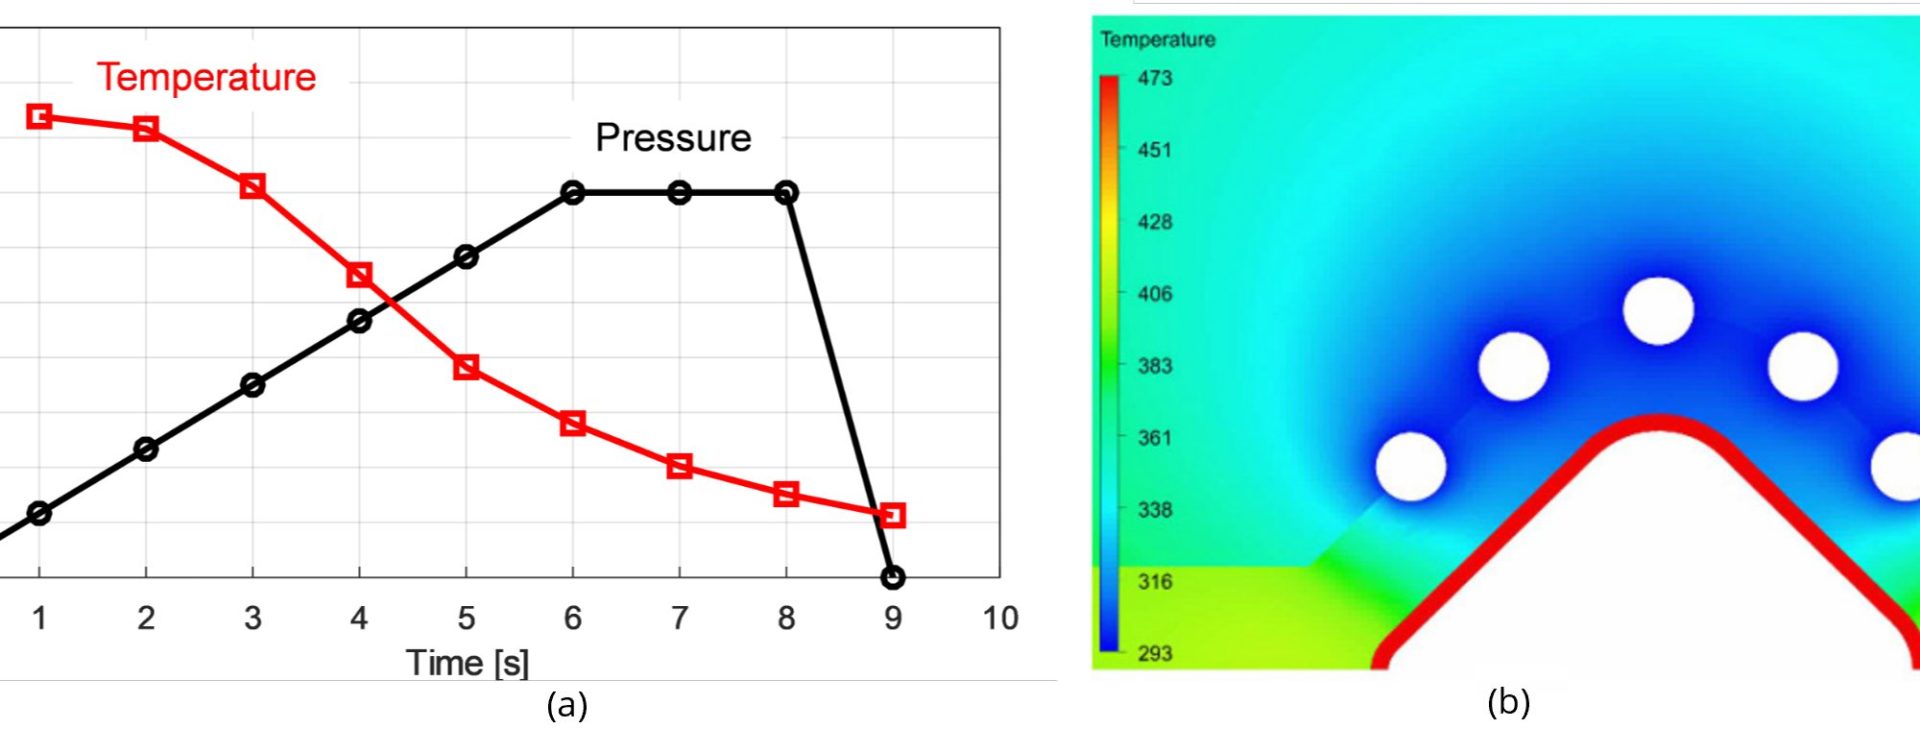 Figure 7: Blow forming and quenching with air: change of pressure in the tube and temperature of the tube, (b) simulation of heat transfer to the dies and cooling channels (recreated after Citation N-16)